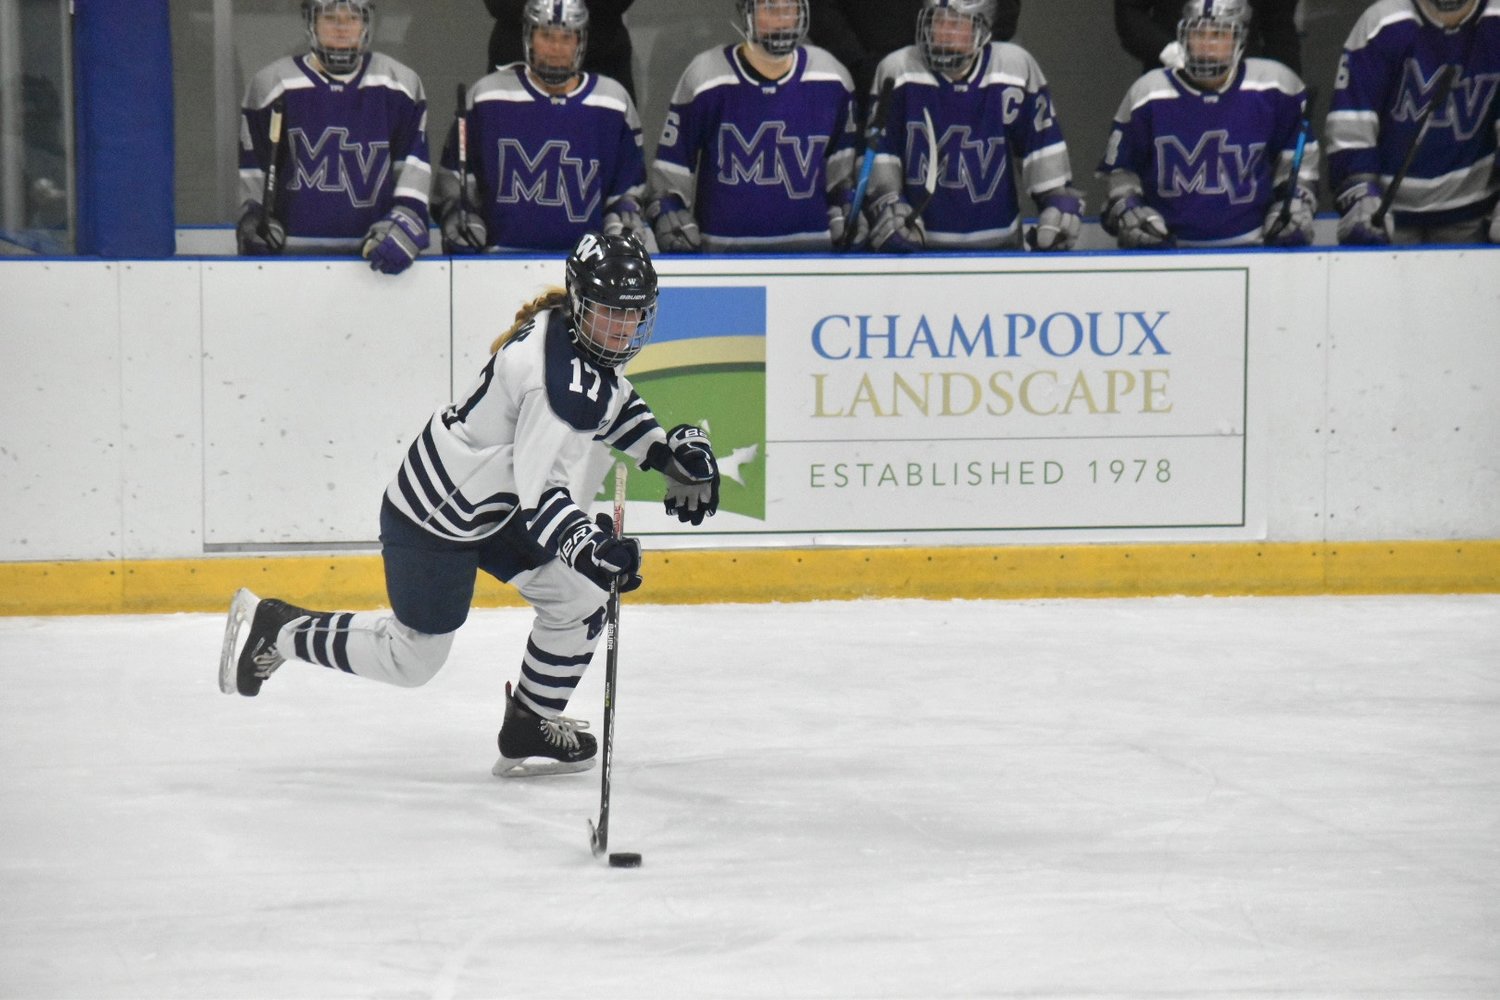 Bailey Lower carries the puck past the Martha’s Vineyard bench during Sunday’s game.